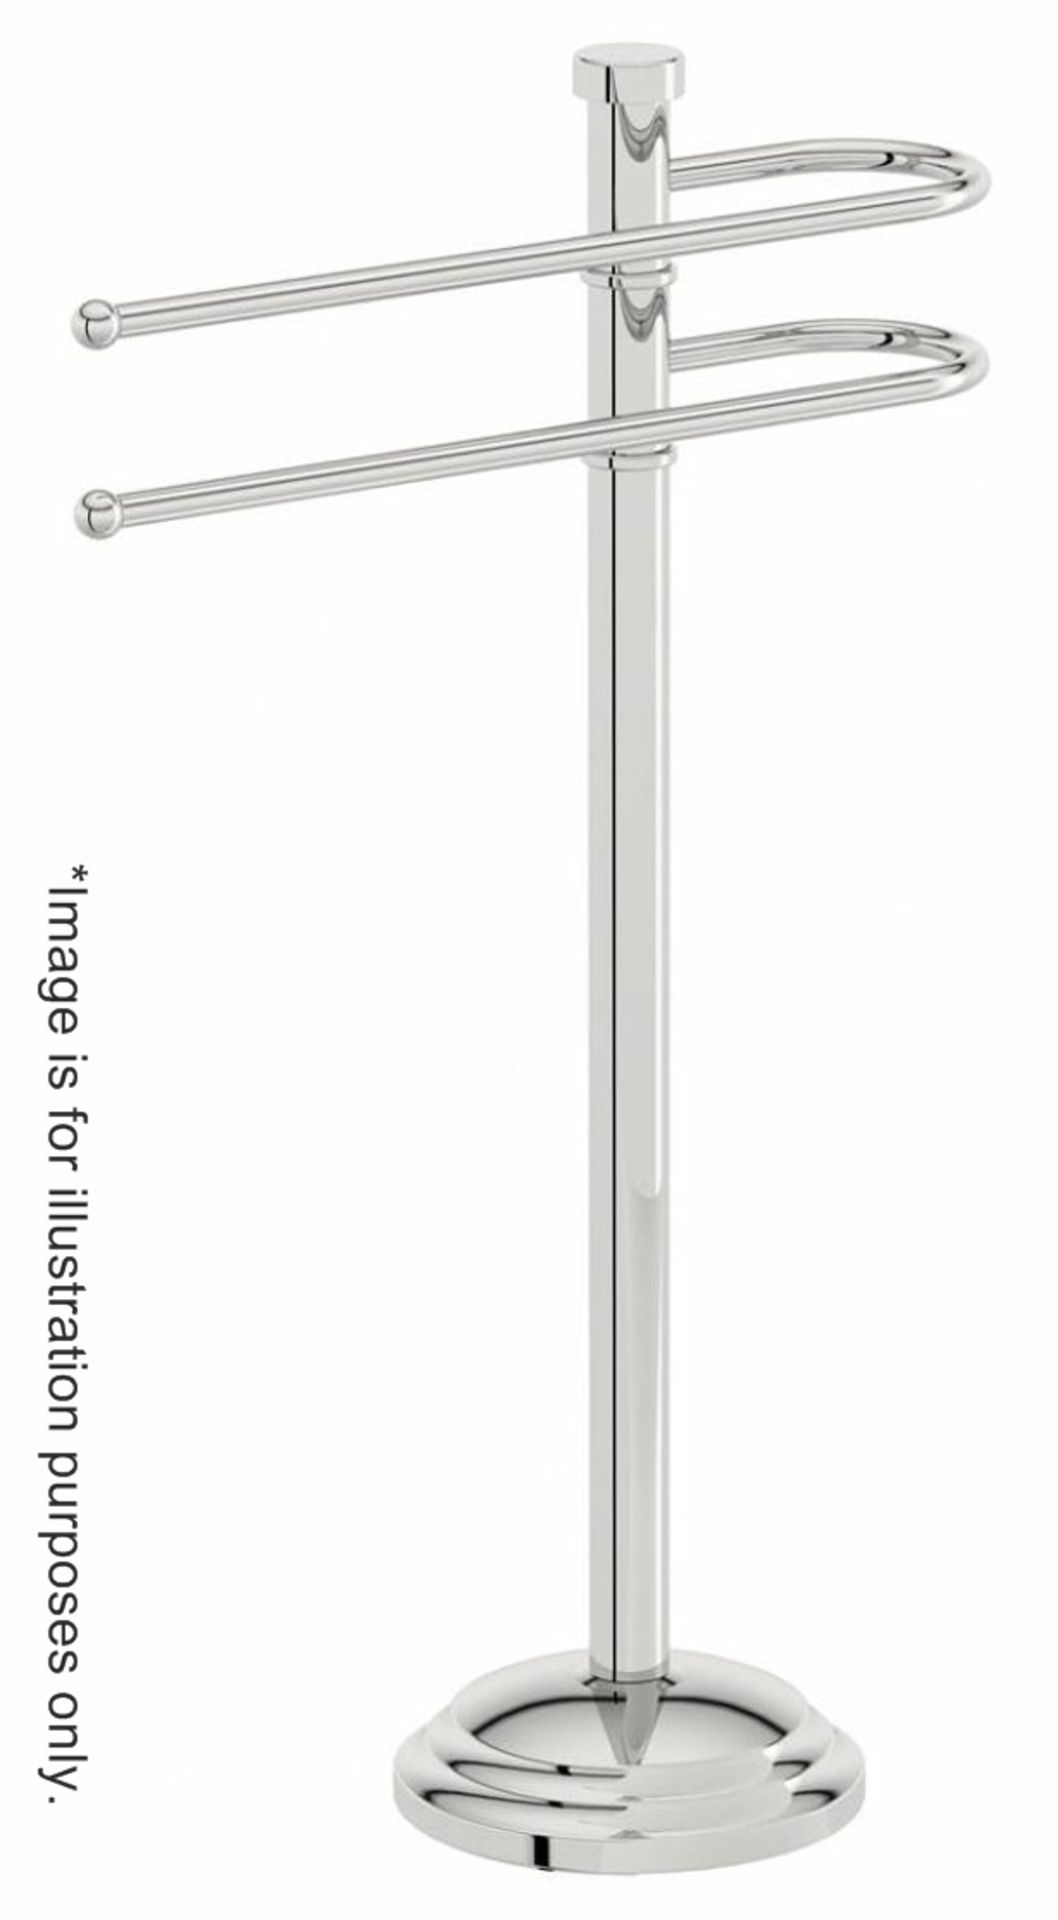 1 x Traditional Freestanding Towel Rail - Ref: MBI021 - CL190 - Stainless Steel, Finished In - Image 2 of 6